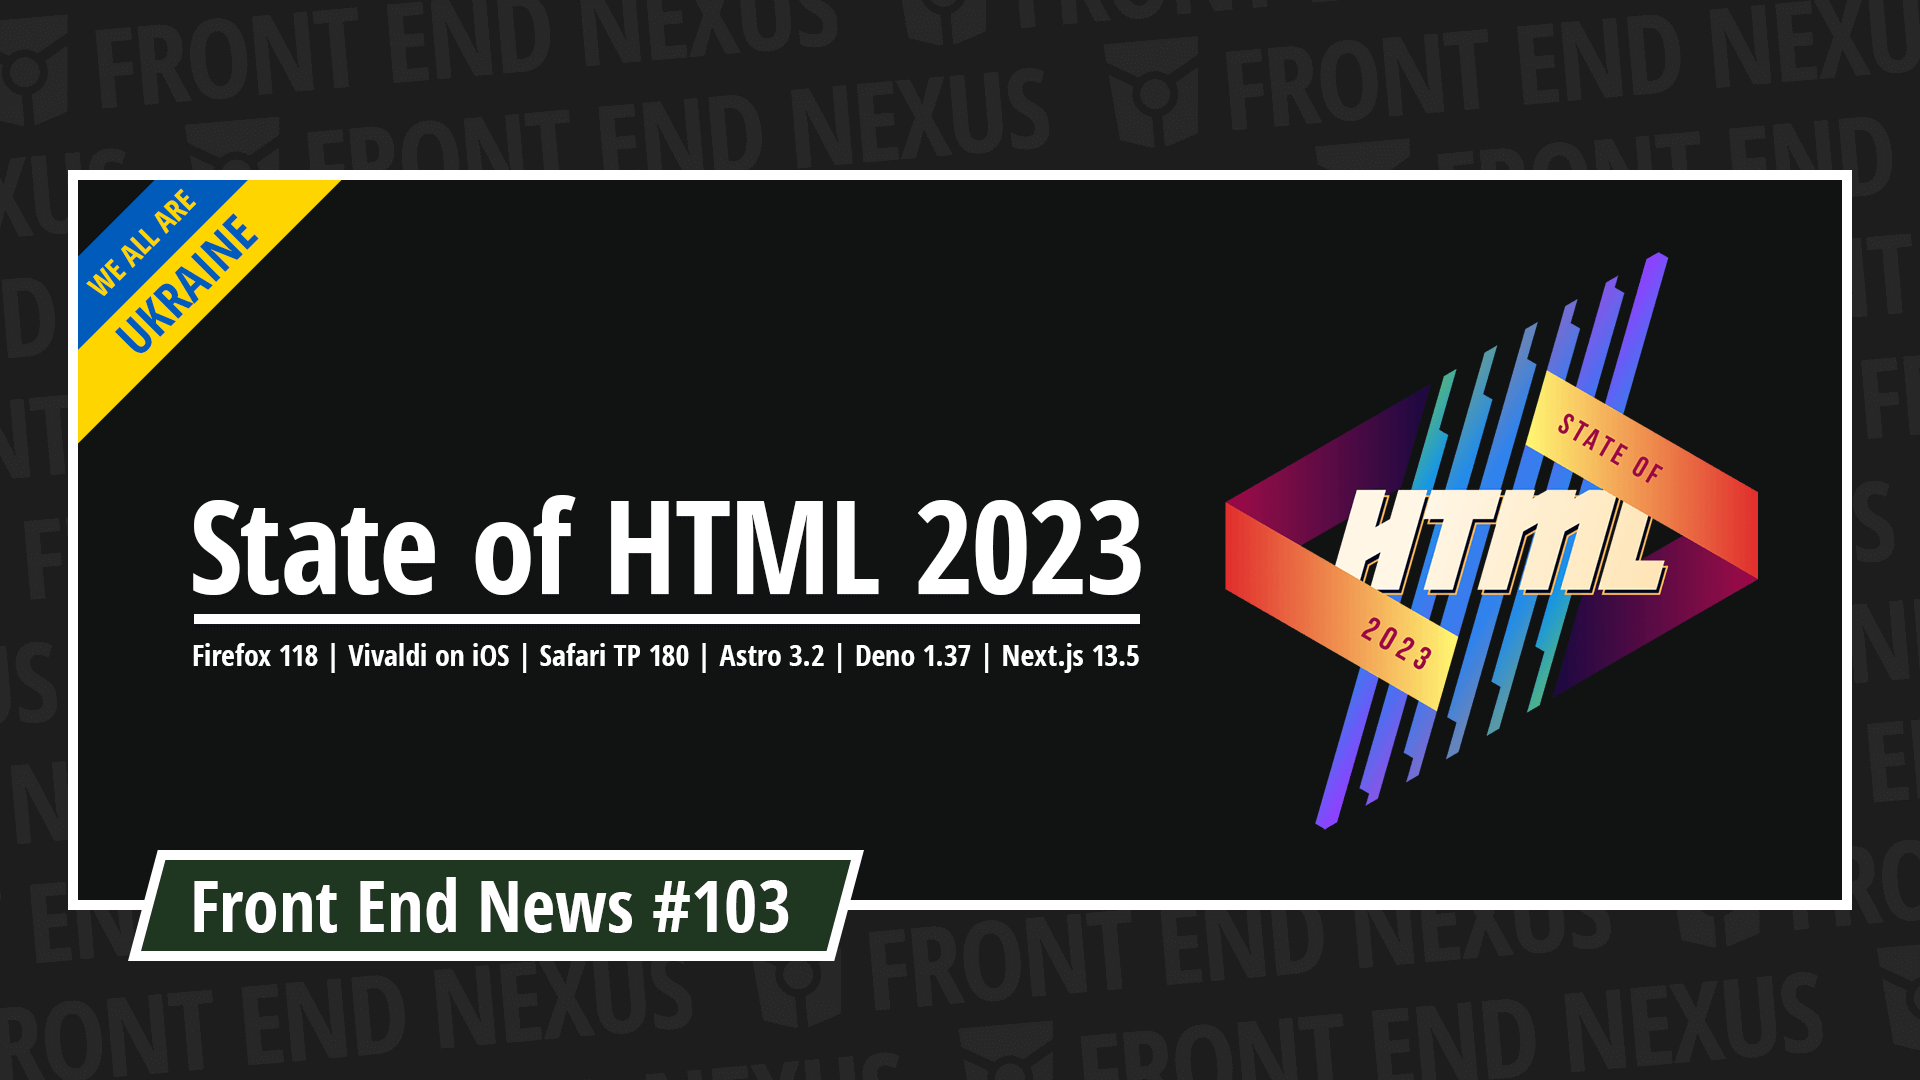 State of HTML, Firefox 118, Vivaldi on iOS, Safari TP 180, Astro 3.2, Deno 1.37, Next.js 13.5, and more | Front End News #103